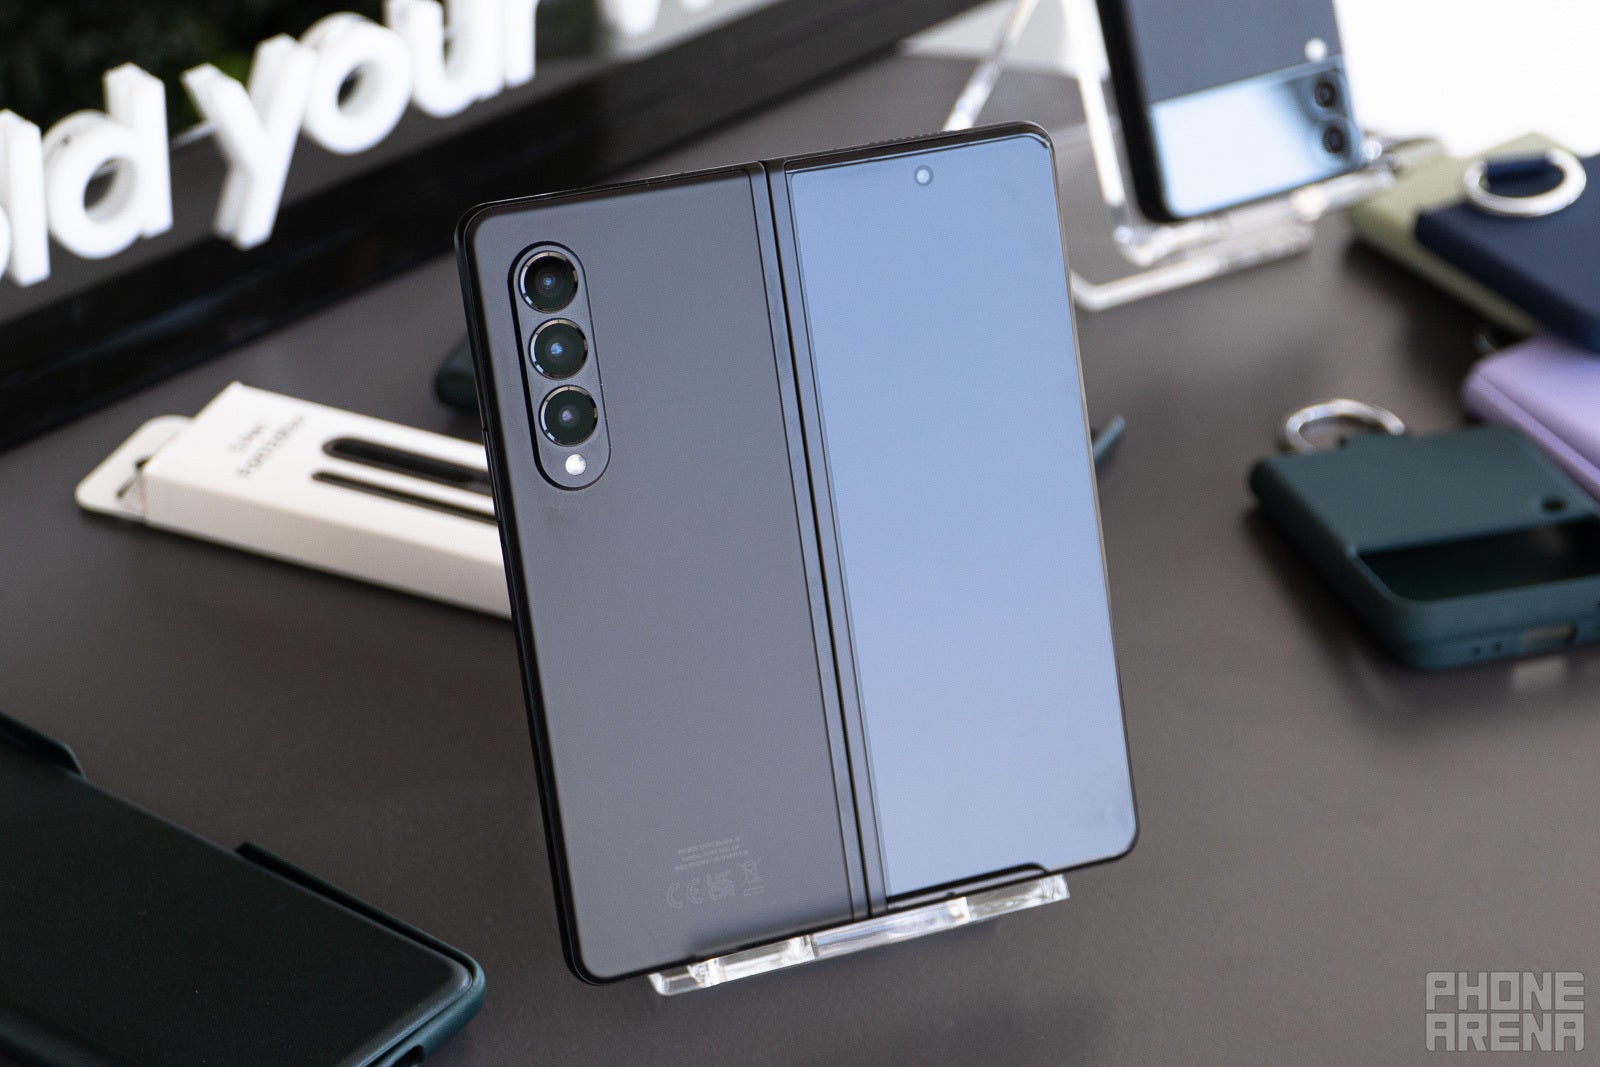 Samsung Galaxy Z Fold 3 review: key features